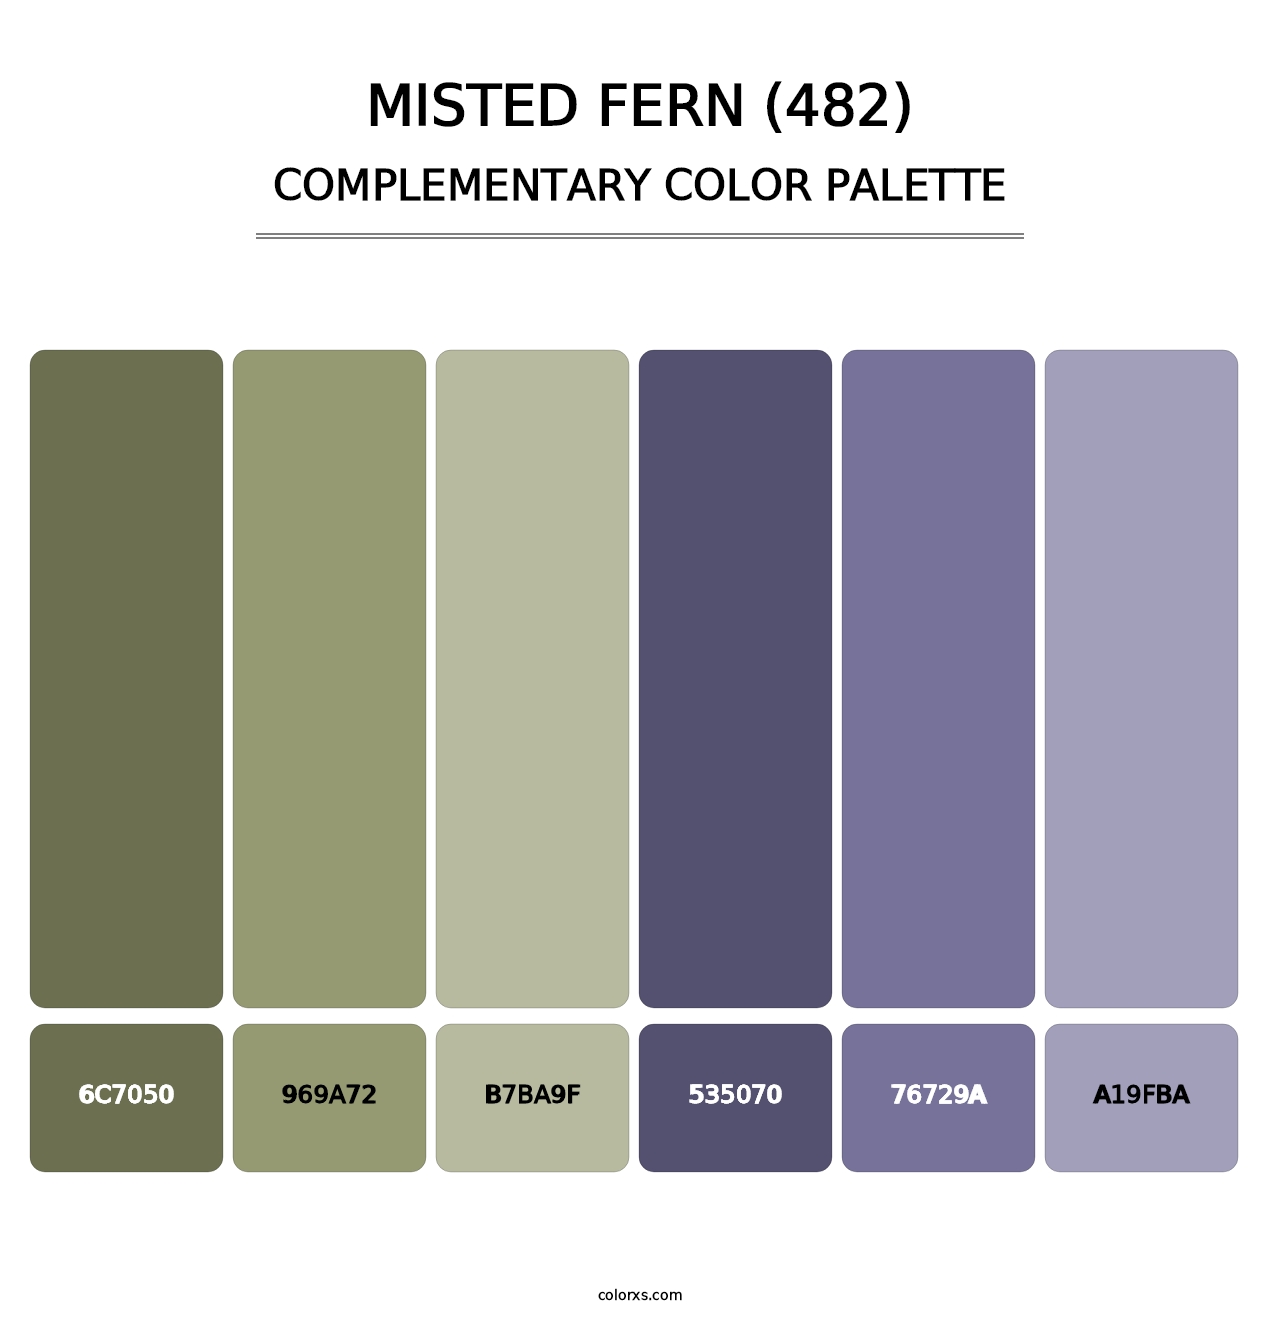 Misted Fern (482) - Complementary Color Palette